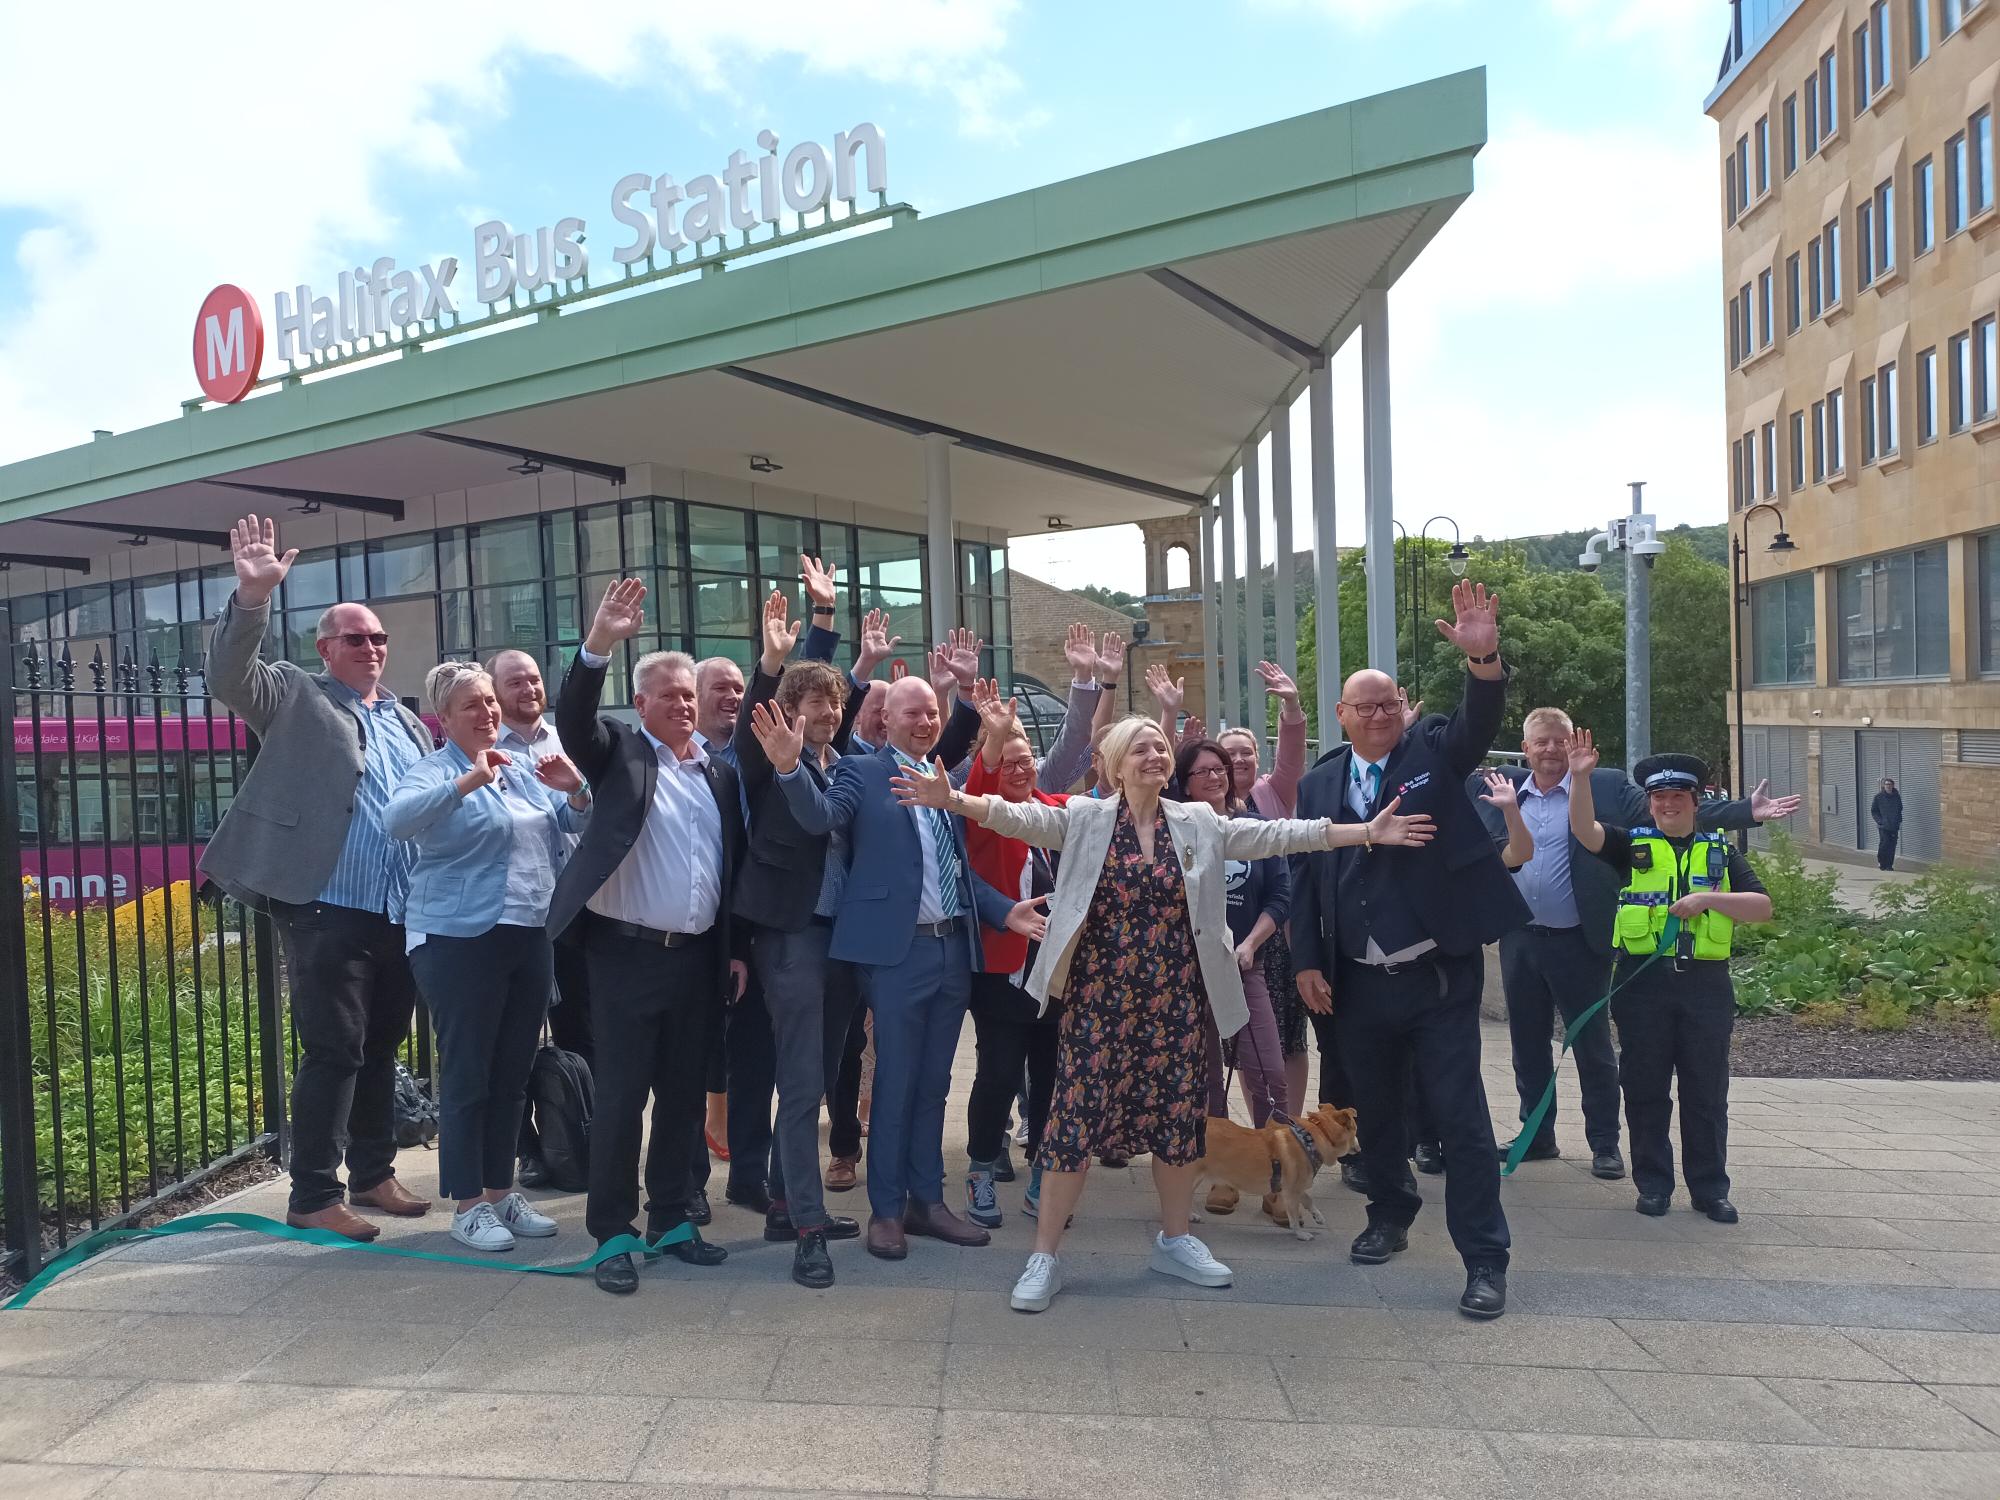 Halifax bus station opening. Gathering of people celebrating with the Mayor of West Yorkshire in centre.